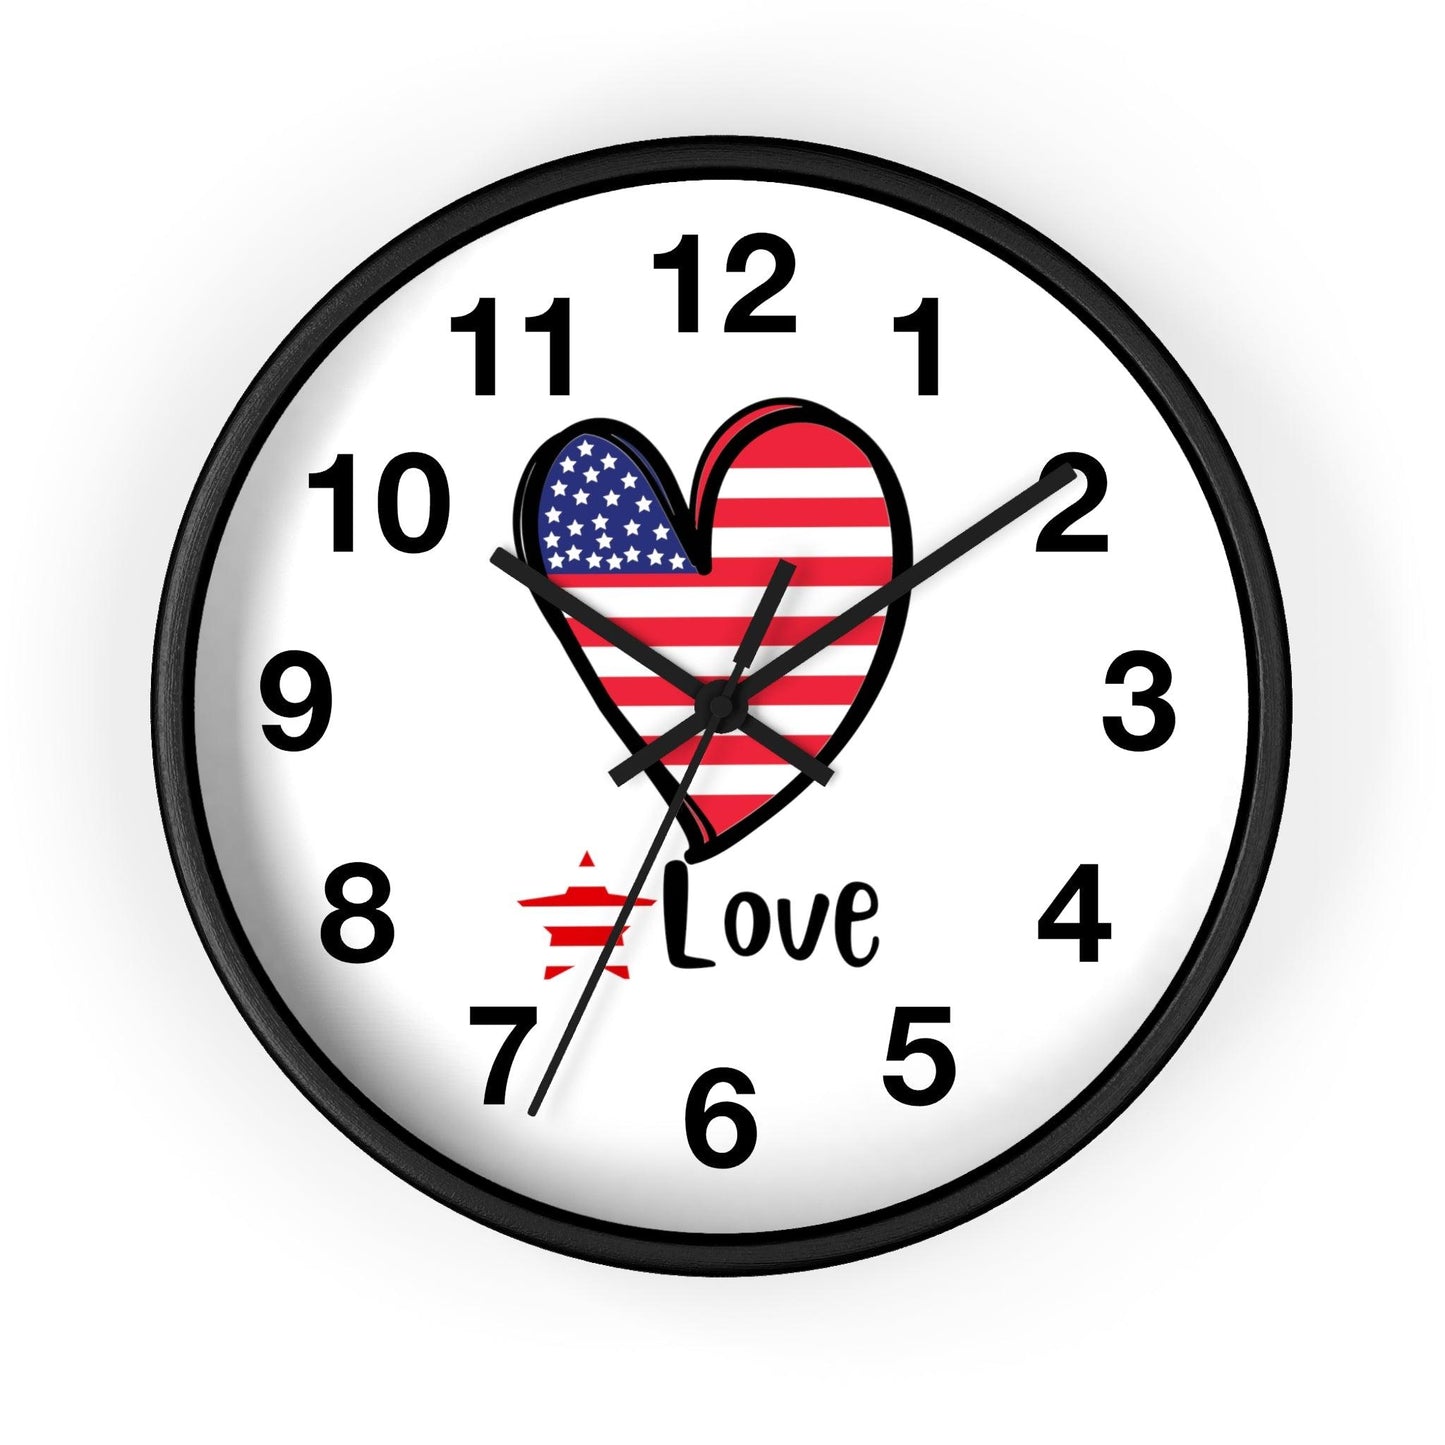 USA Flag Wall Clock, Home Decor gift, House Warming Gift, New Home Gift, Patriotic Gift for Americans Office Clock School Clock Home Clock